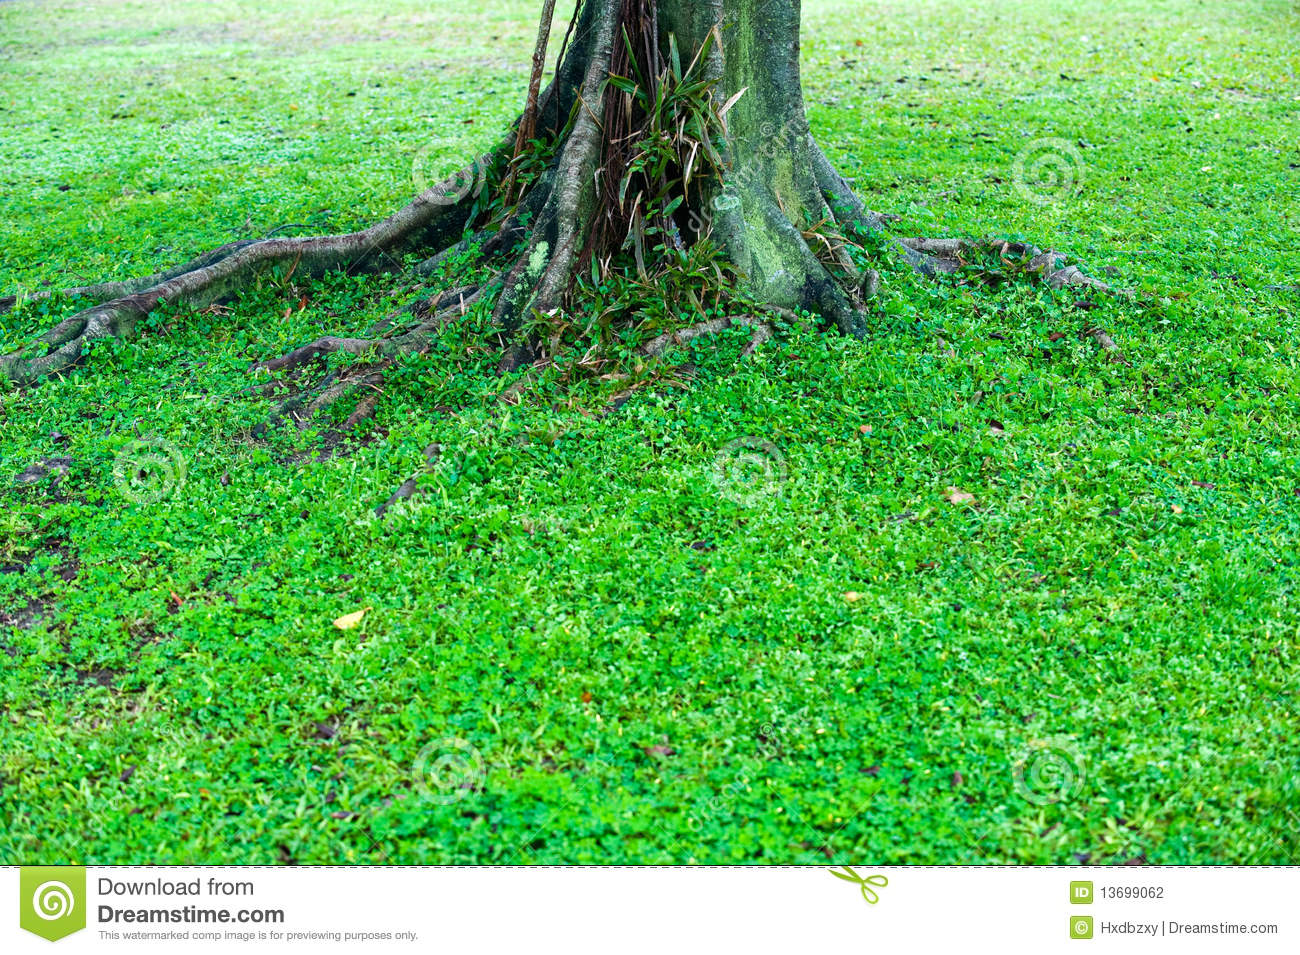 Trees with Roots Above Ground